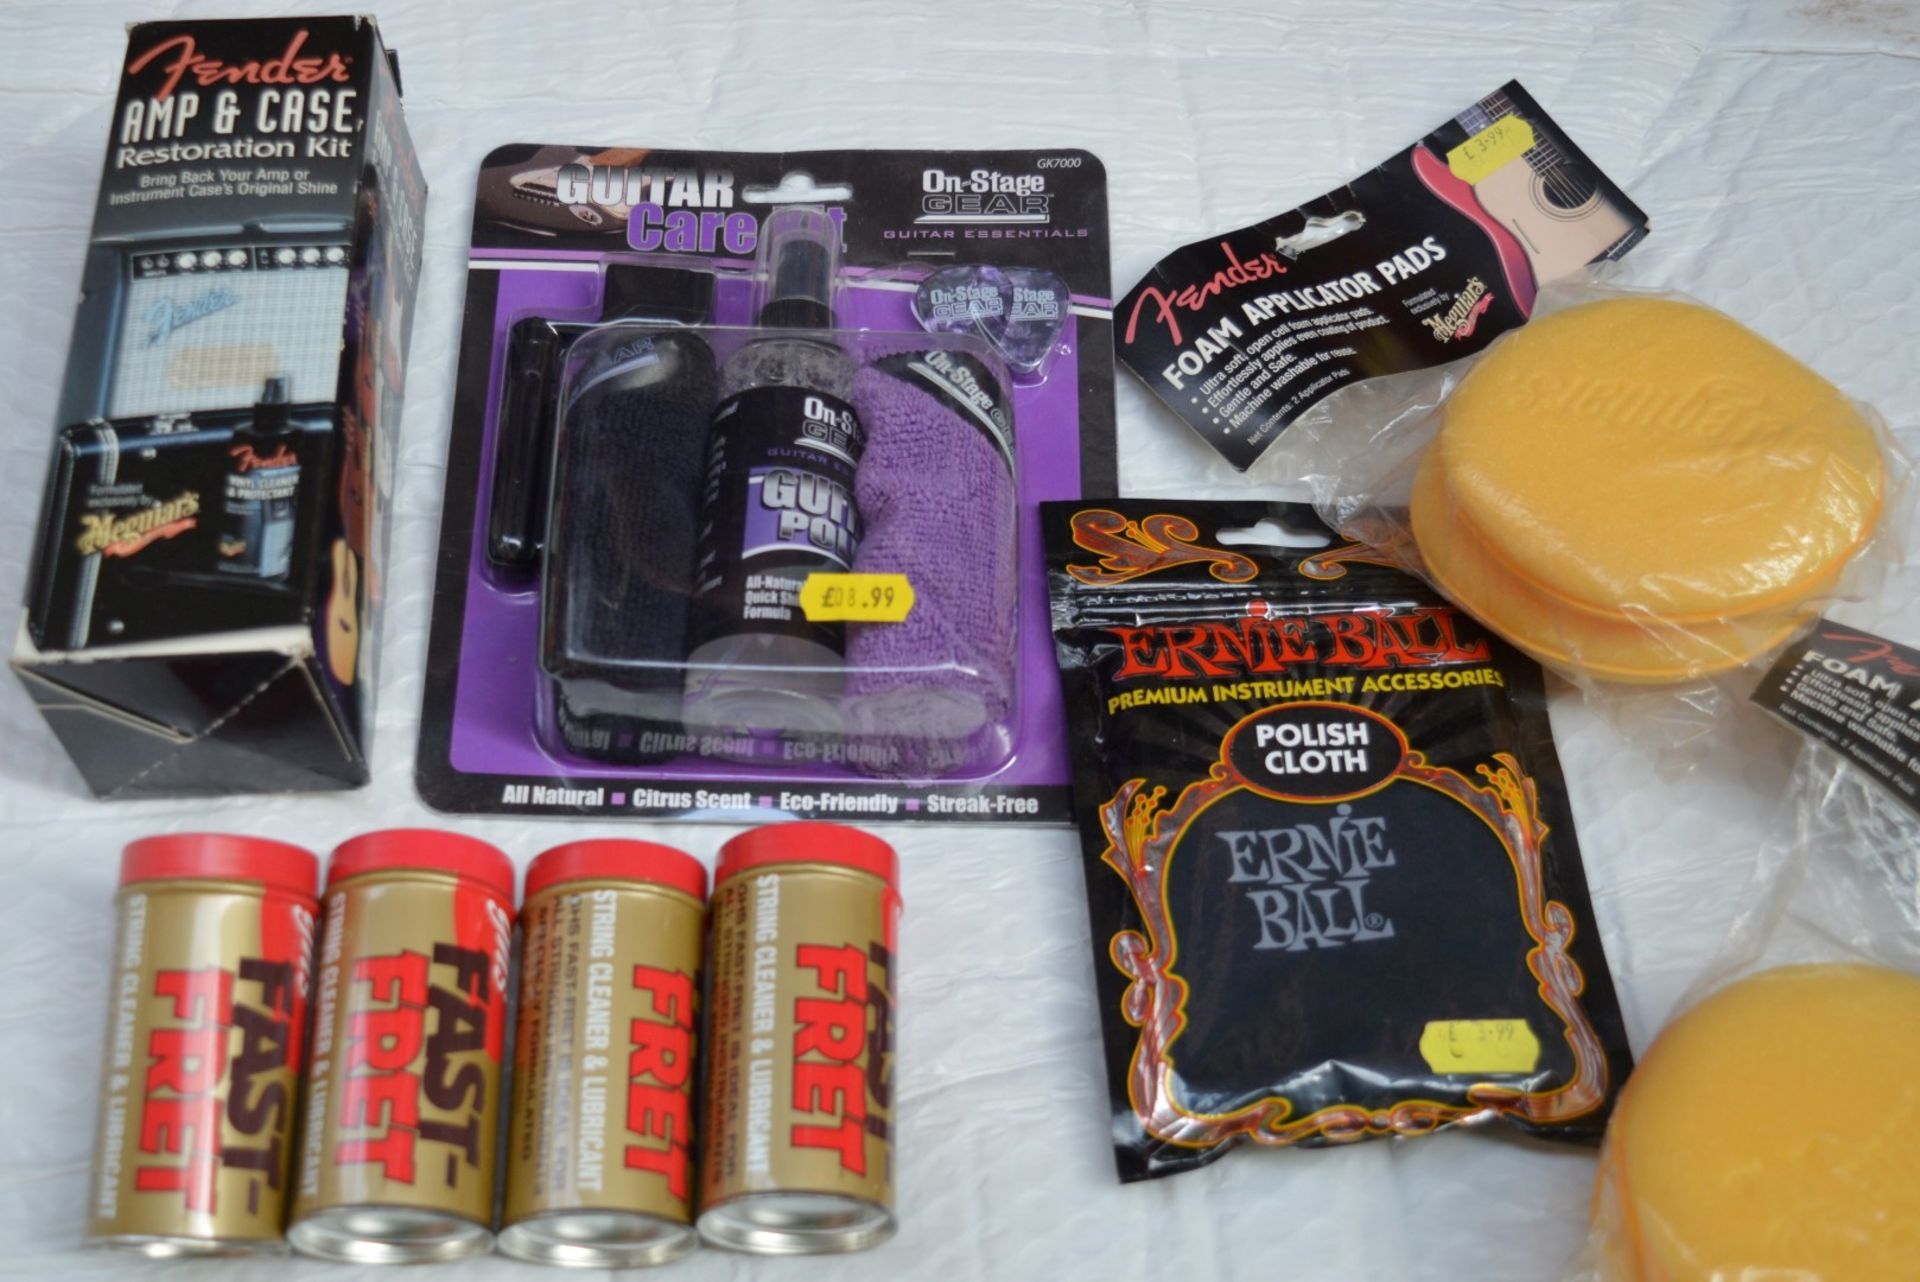 1 x Assorted Job Lot of Guitar Care Accessories - Includes 1 x Guitar Care Kit, 1 x Ernie Ball - Image 6 of 8